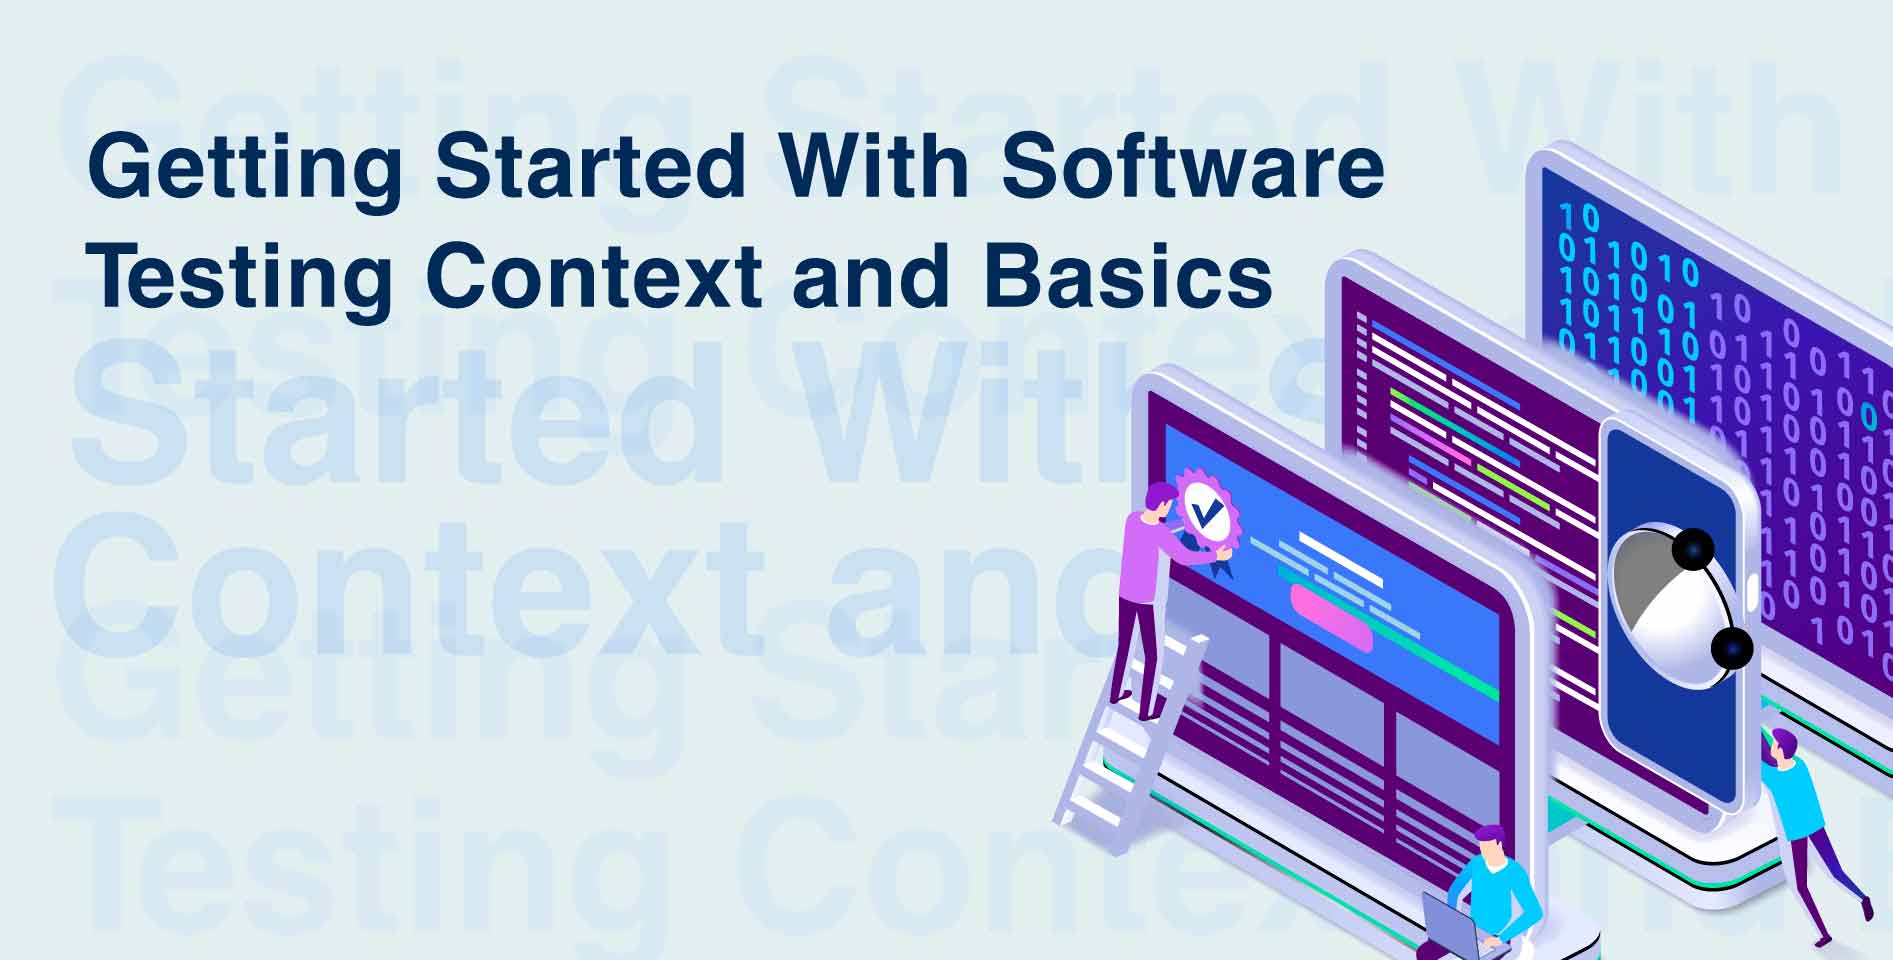 Getting Started With Software Testing Context and Basics‎